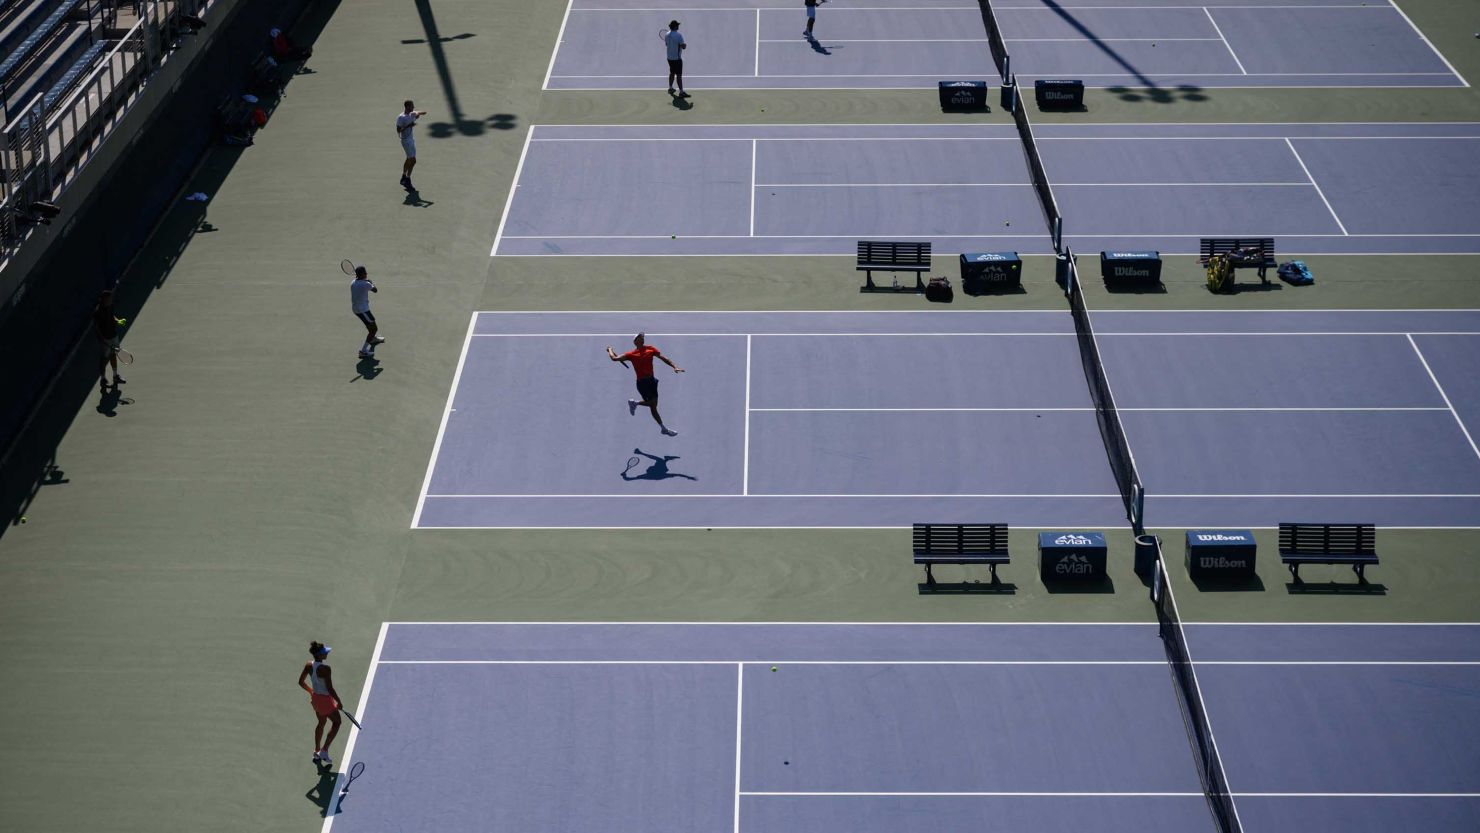 The US Open will offer mental health services to athletes this year | CNN